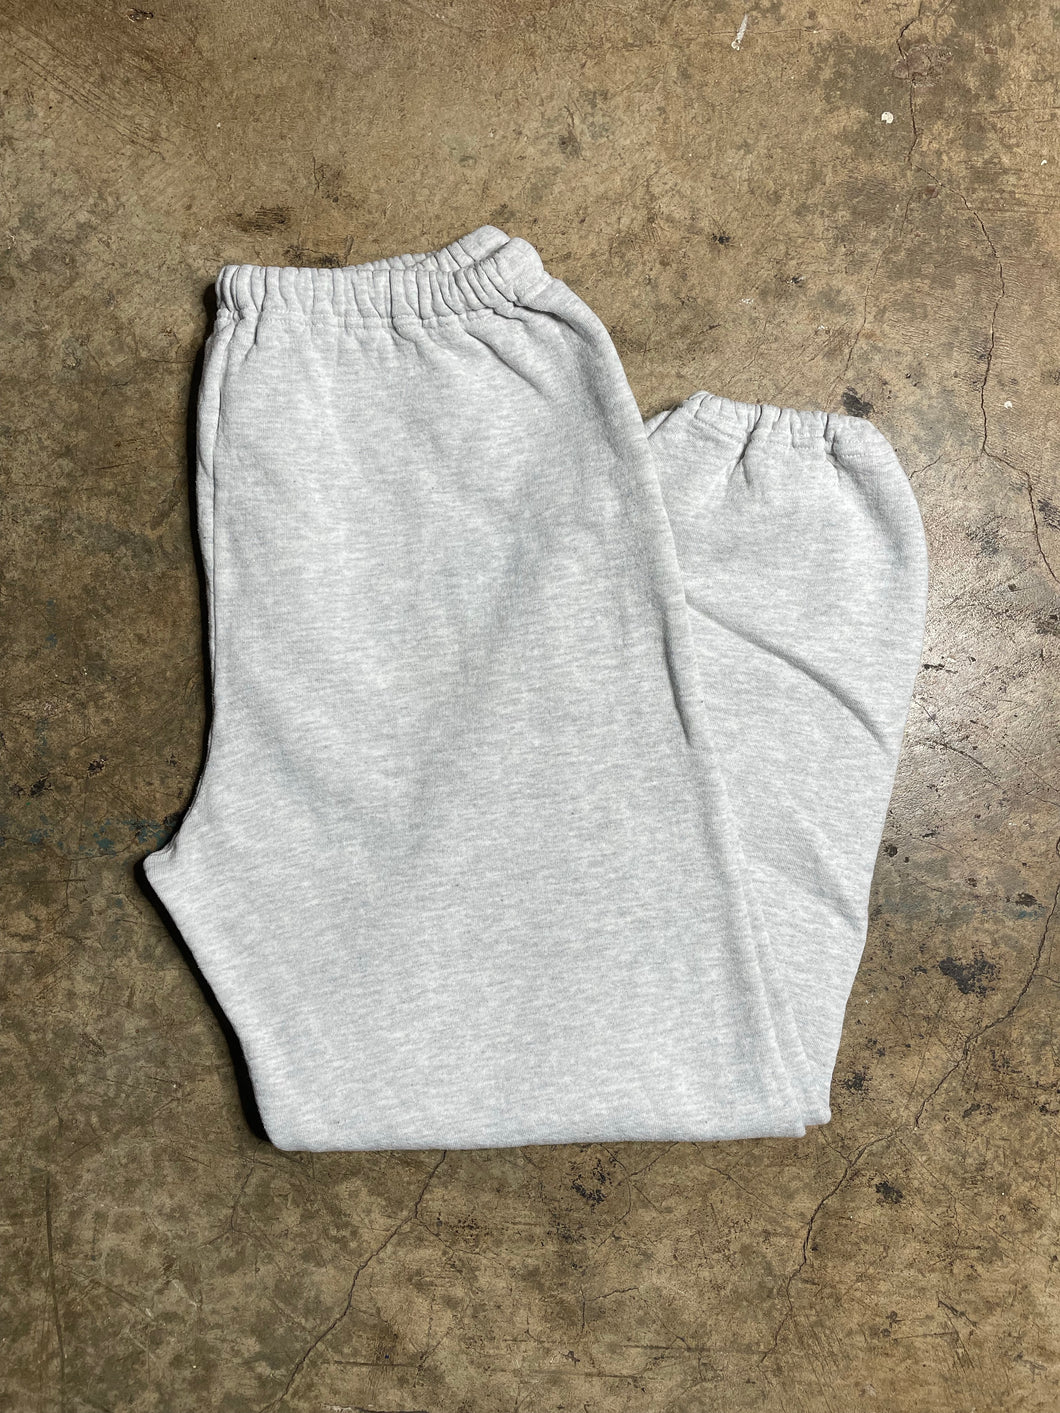 90’s Heather Gray Russell Athletic Sweat Pants - 28-36 x 30